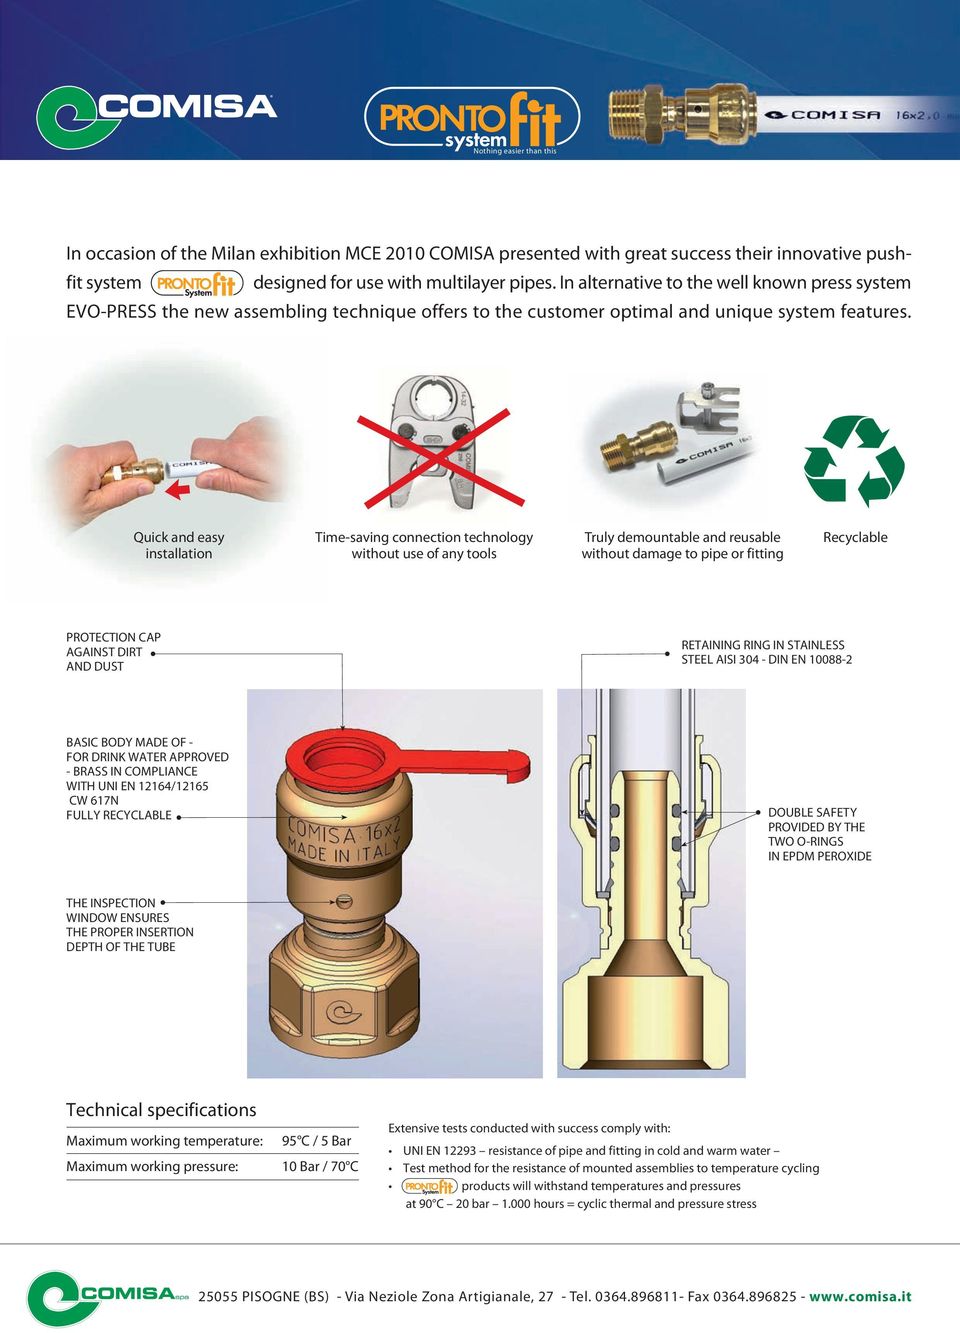 Quick and easy installation Time-saving connection technology without use of any tools Truly demountable and reusable without damage to pipe or fitting Recyclable PROTECTION CAP AGAINST DIRT AND DUST